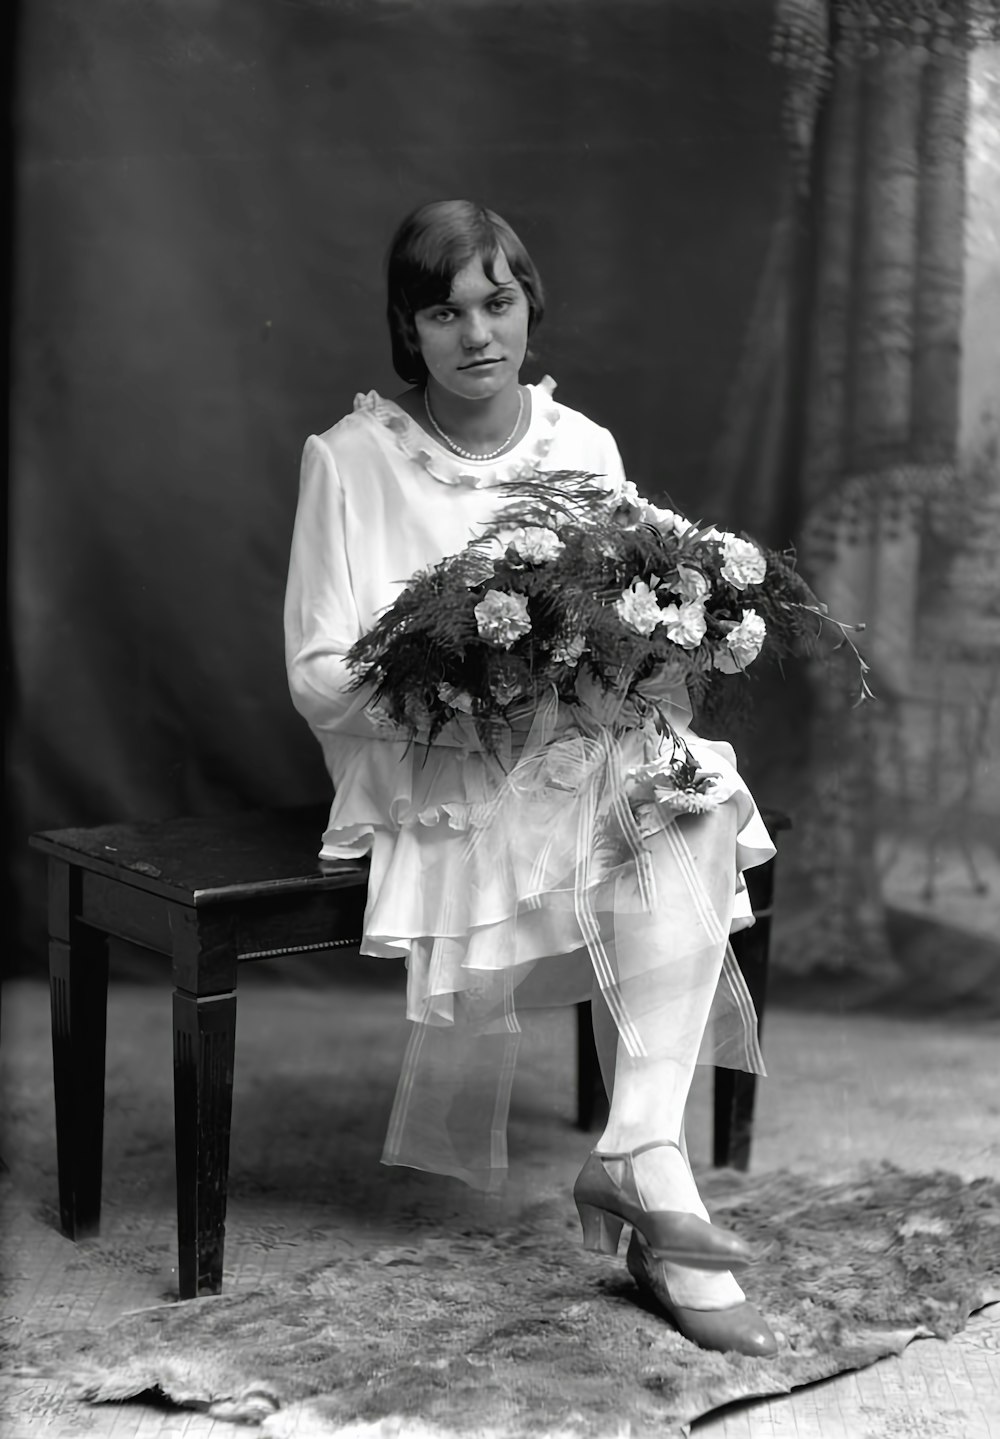 a woman sitting on a bench holding a bouquet of flowers